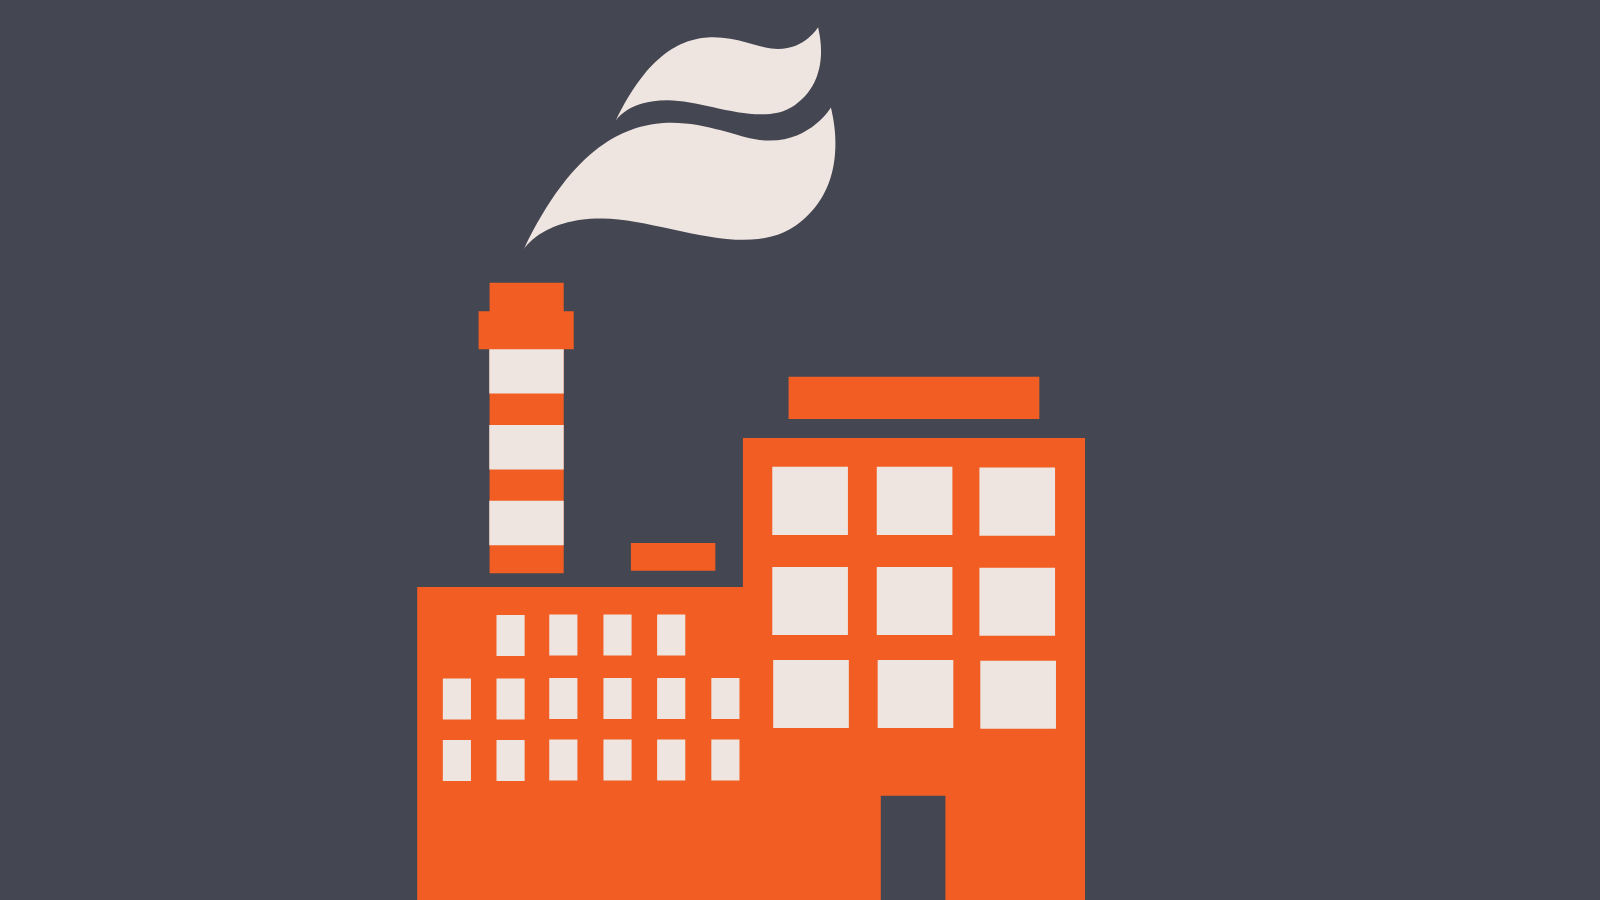 An orange illustration of a factory